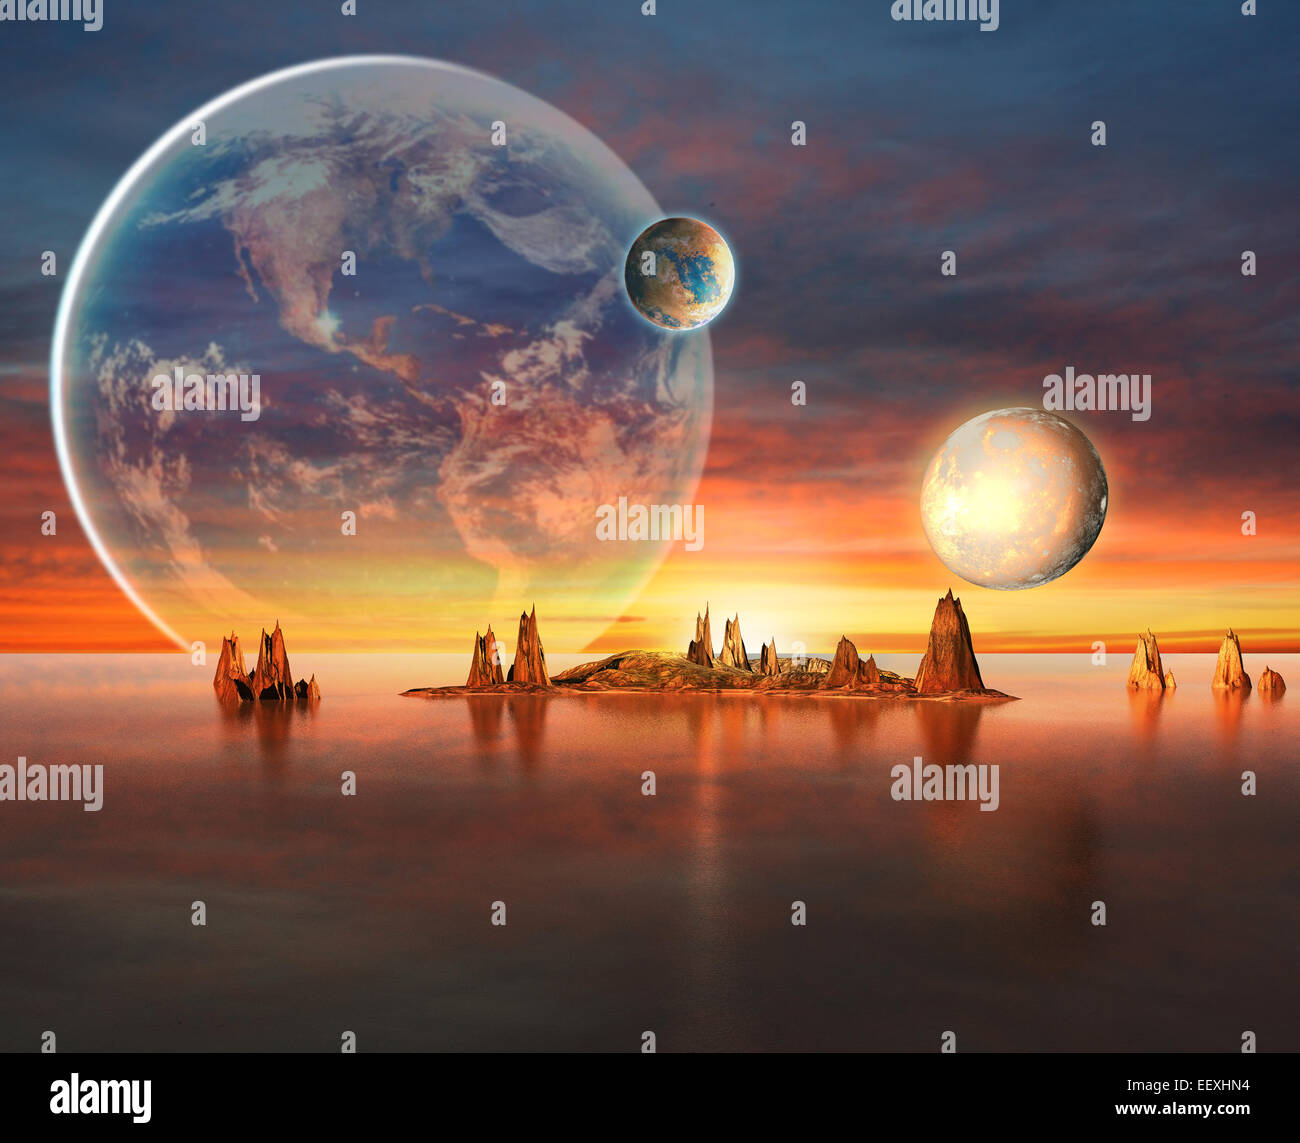 Alien Planet With Earth Moon And Mountains . Stock Photo